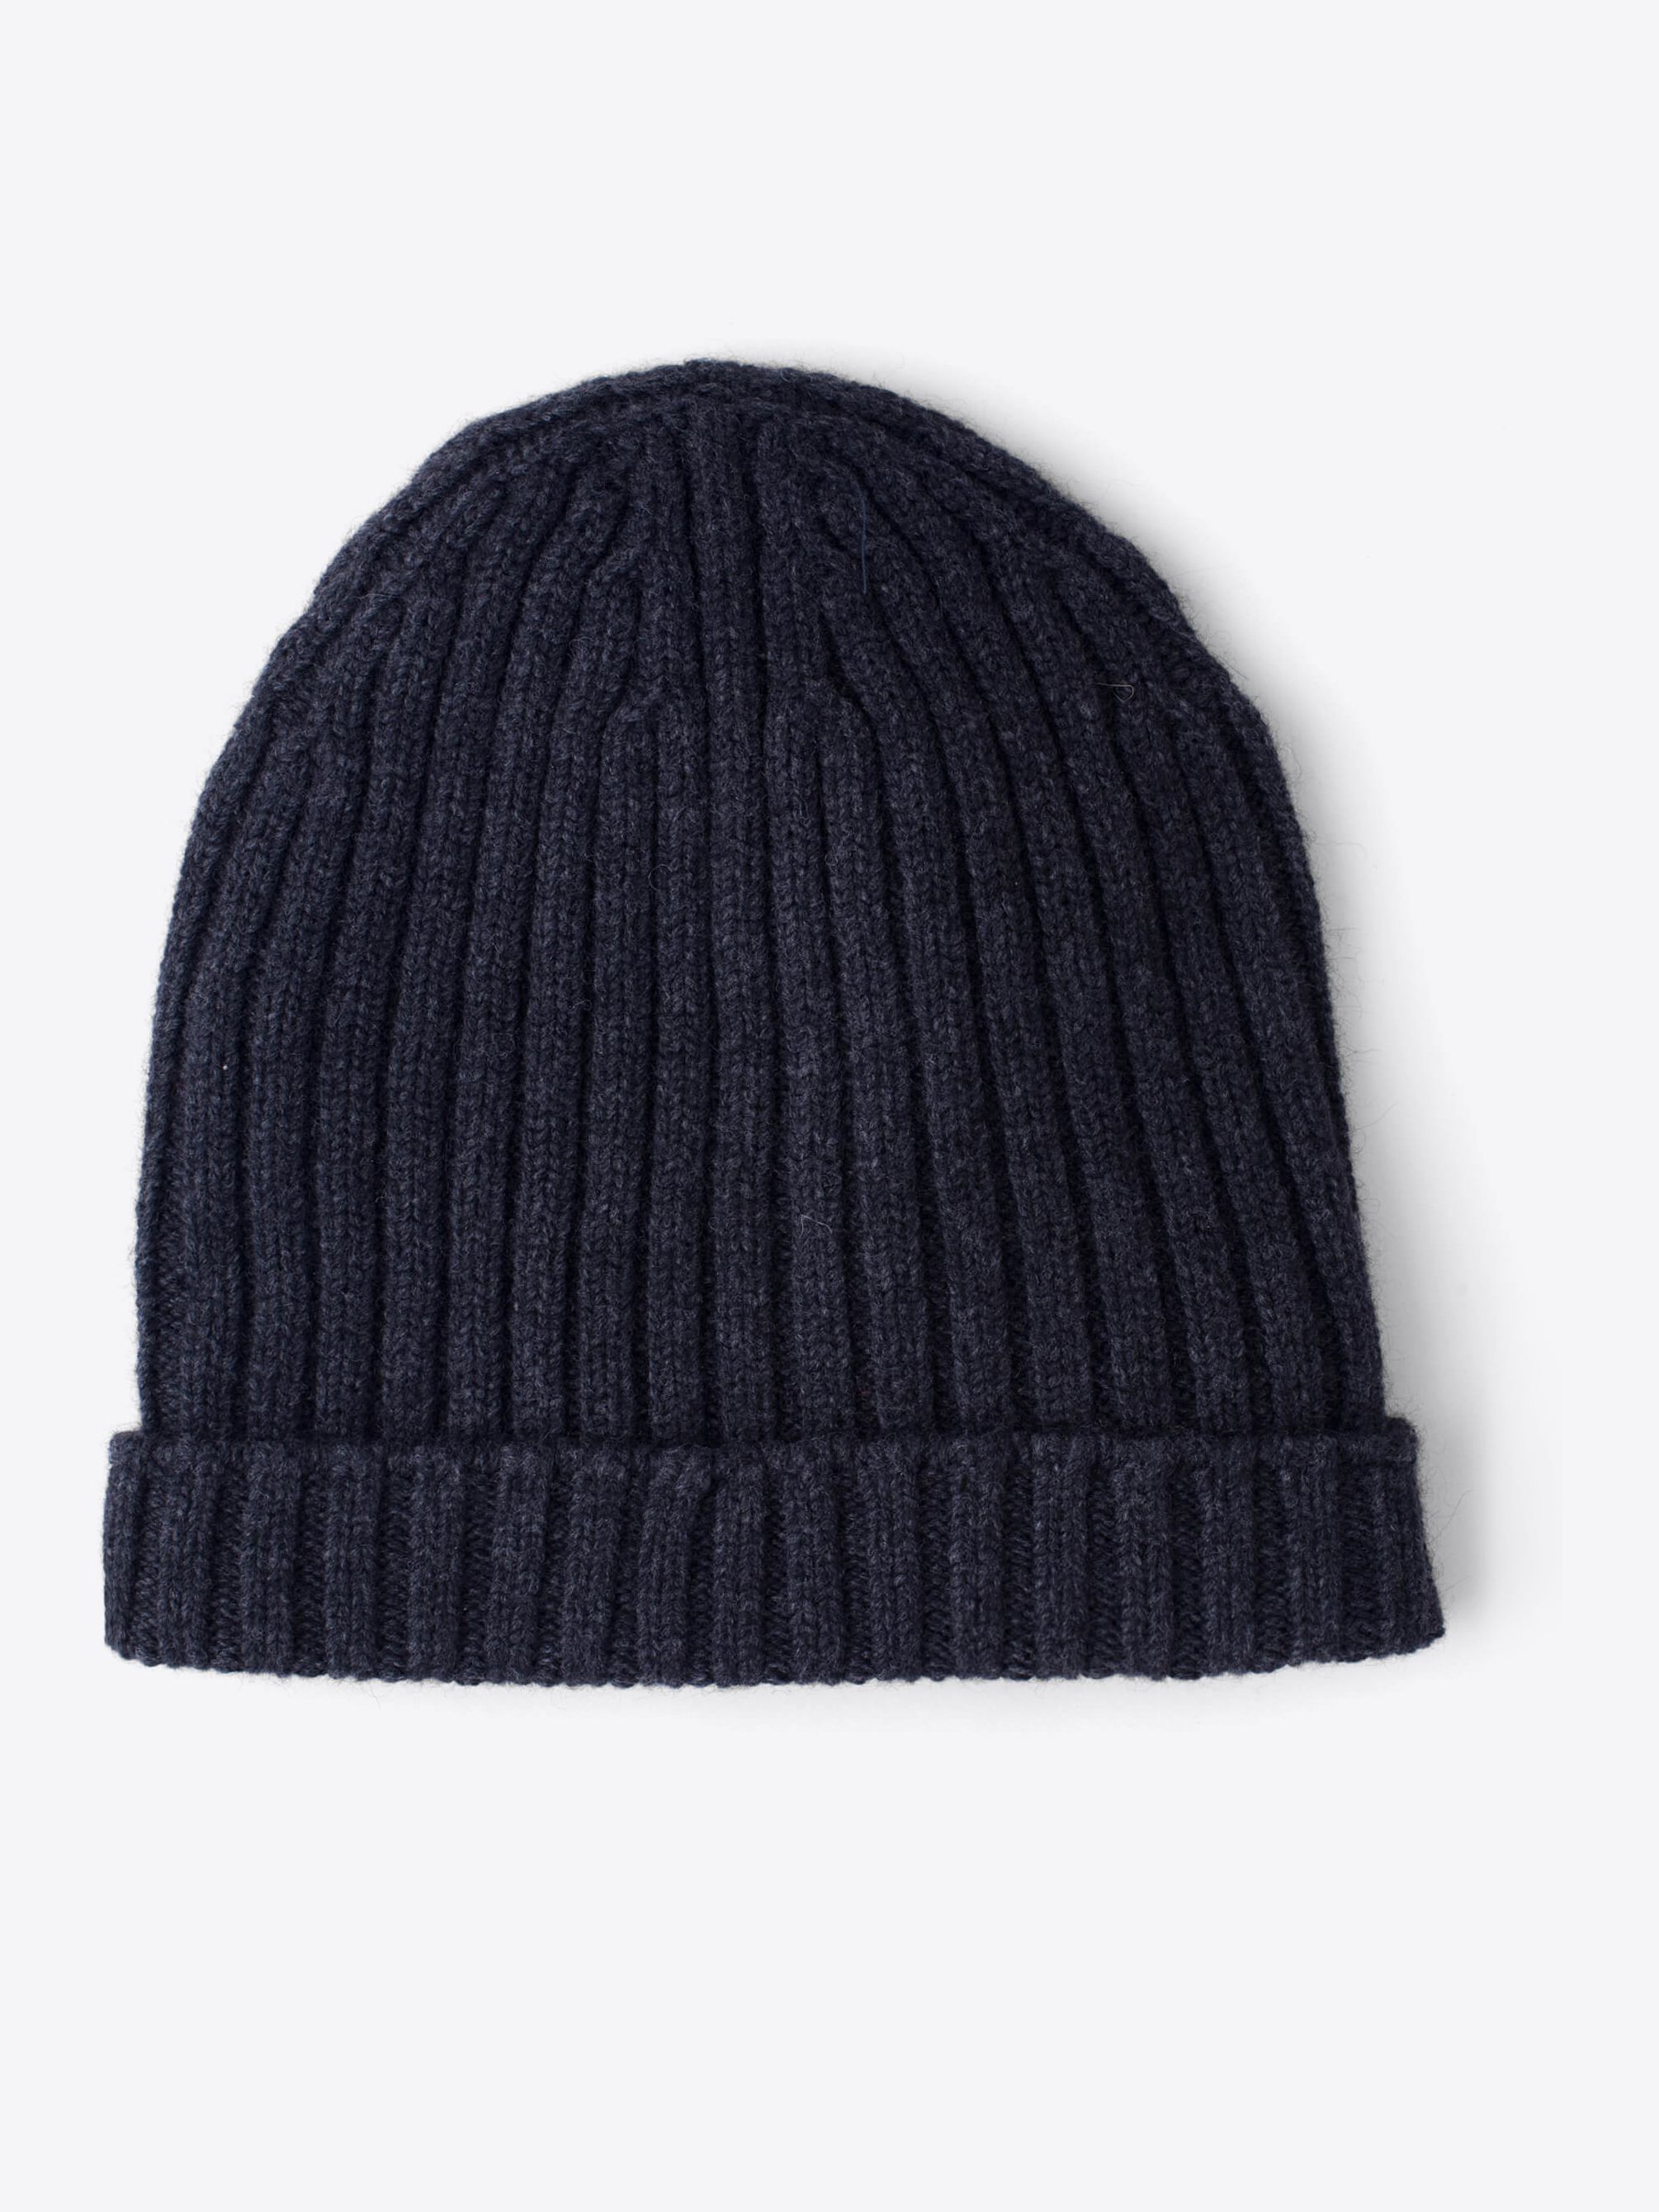 Zoom Image of Charcoal Wool and Cashmere Italian Knit Hat